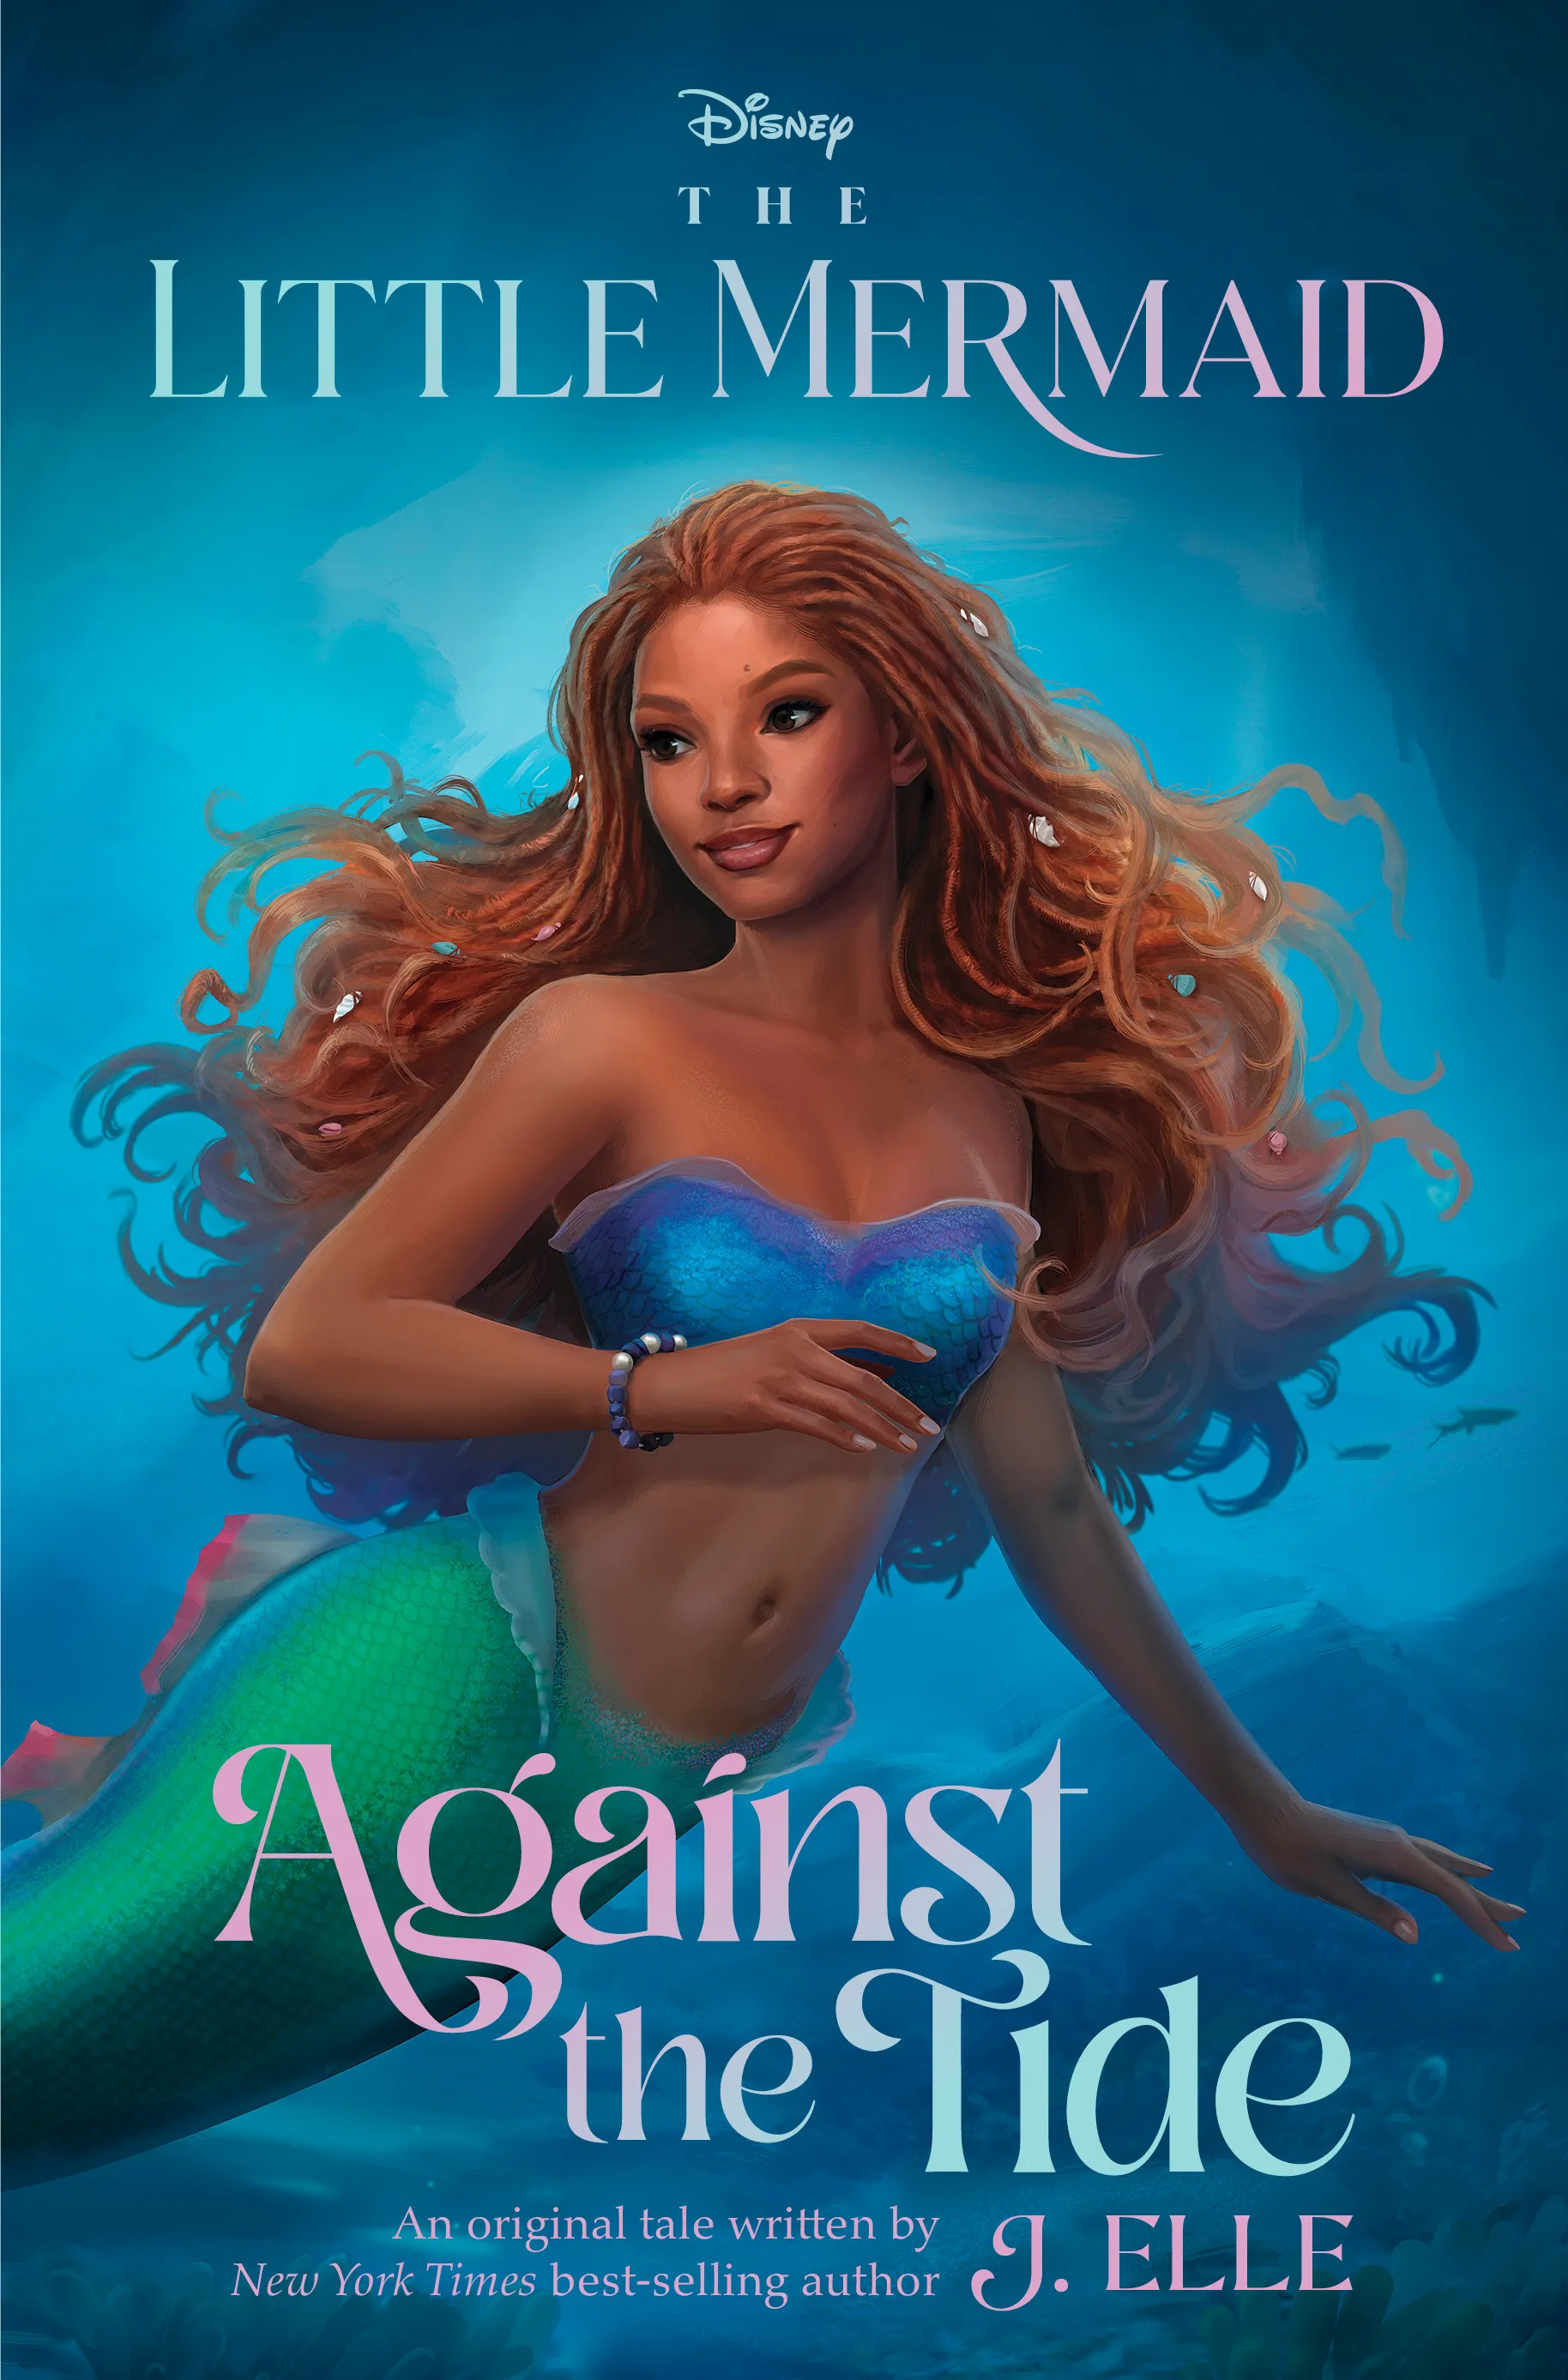 https://static.wikia.nocookie.net/disney/images/7/76/The_Little_Mermaid_-_Against_the_Tide.jpg/revision/latest?cb=20230202173551